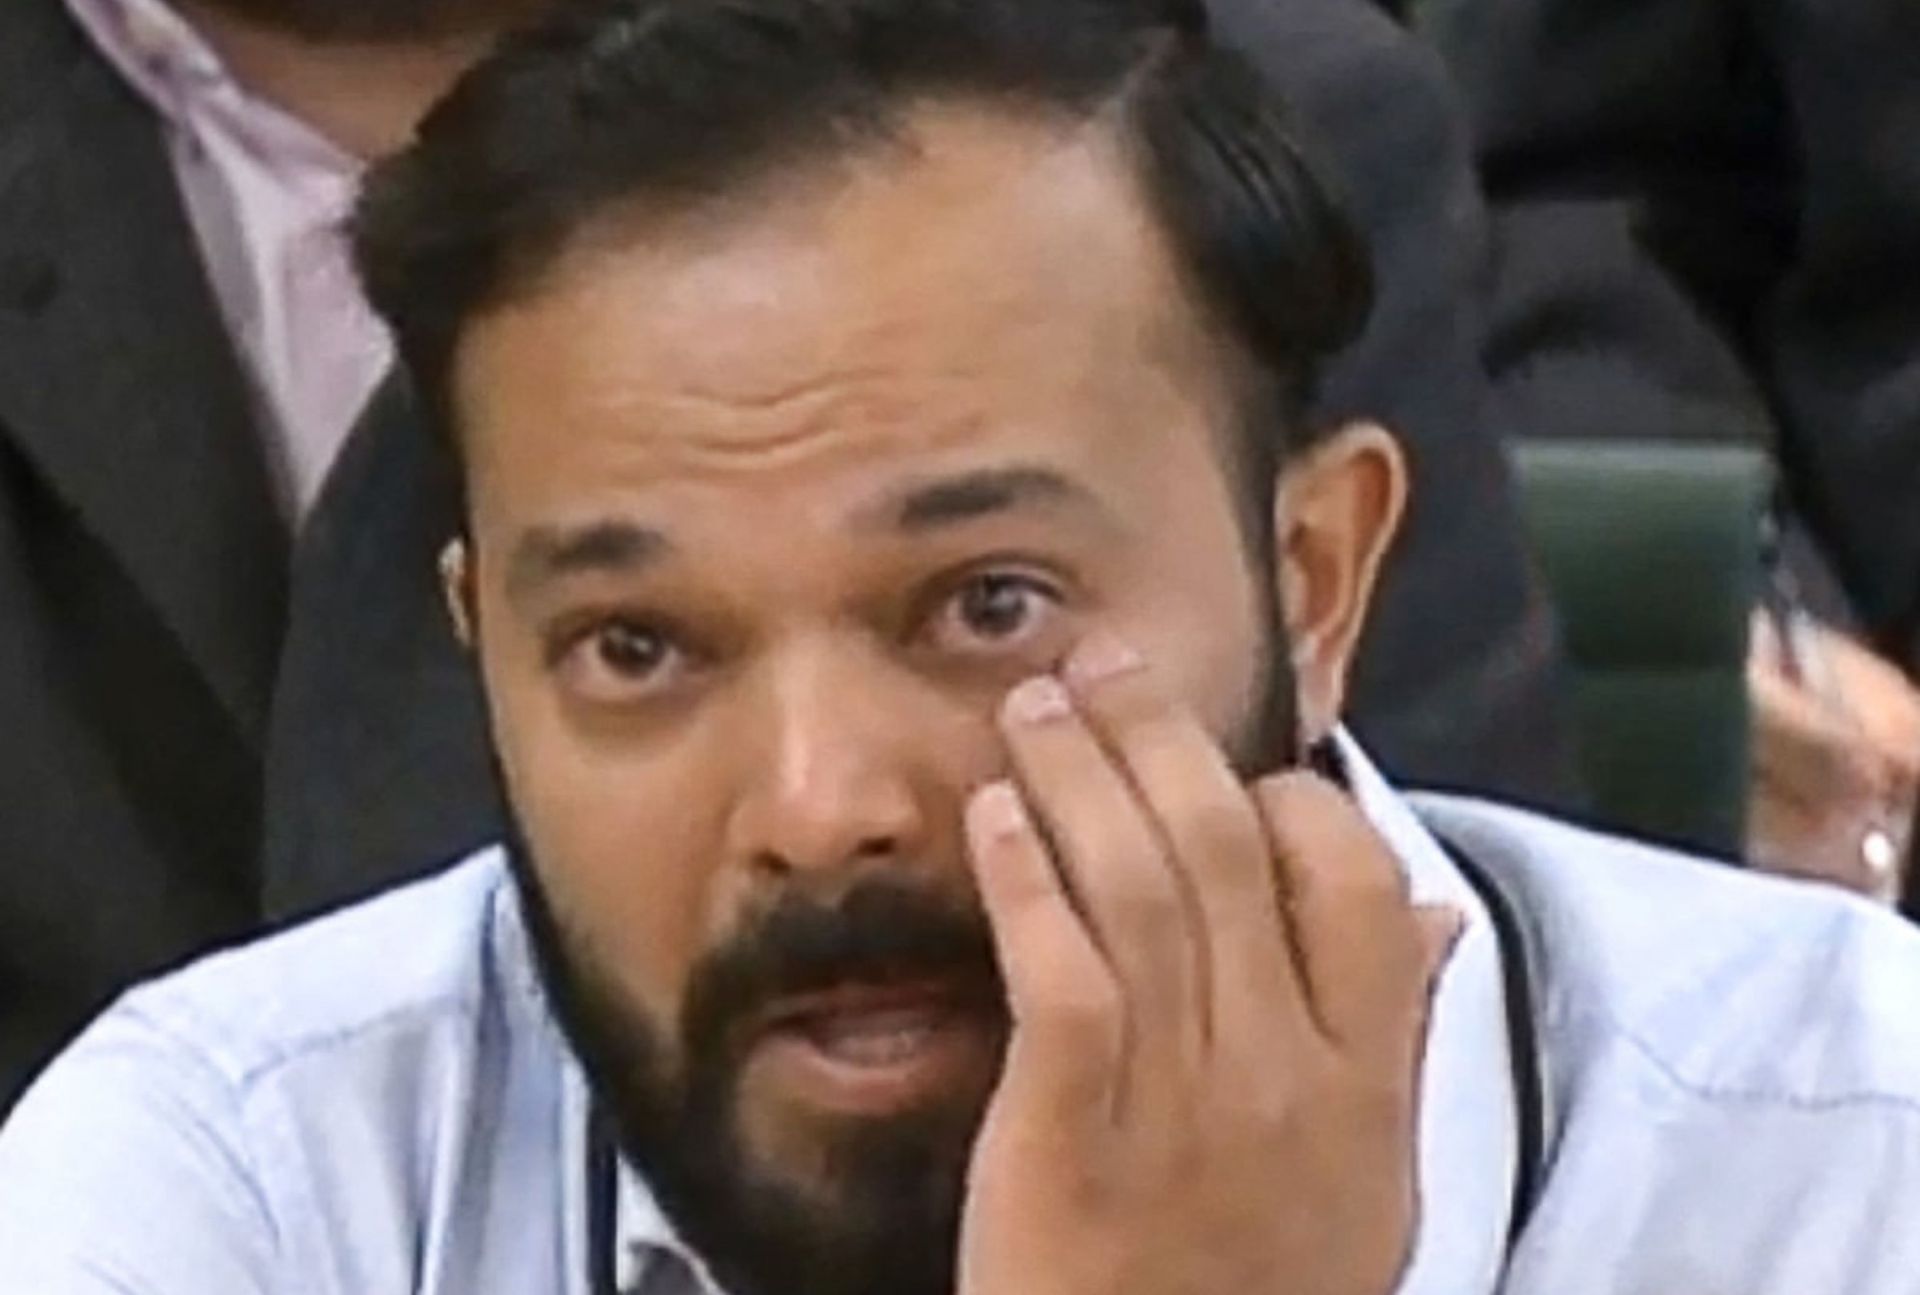 Azeem Rafiq was in tears while revealing disturbing incidents at the hearing. (Pic credits: The Guardian)